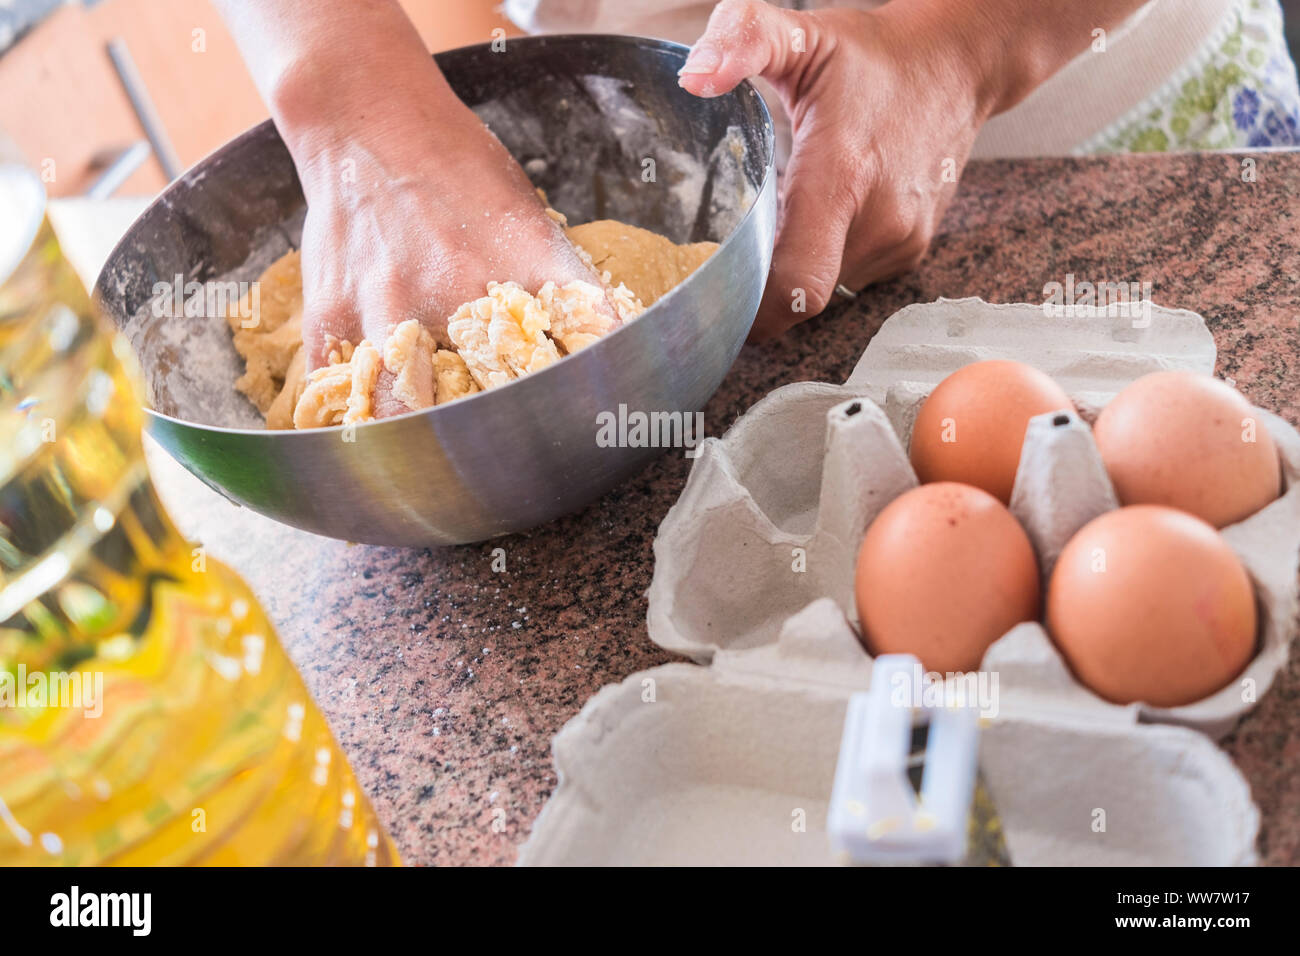 hard work in the kitchen to prepare and cook some cake. hands of a woman at home with natural food like eggs. Stock Photo